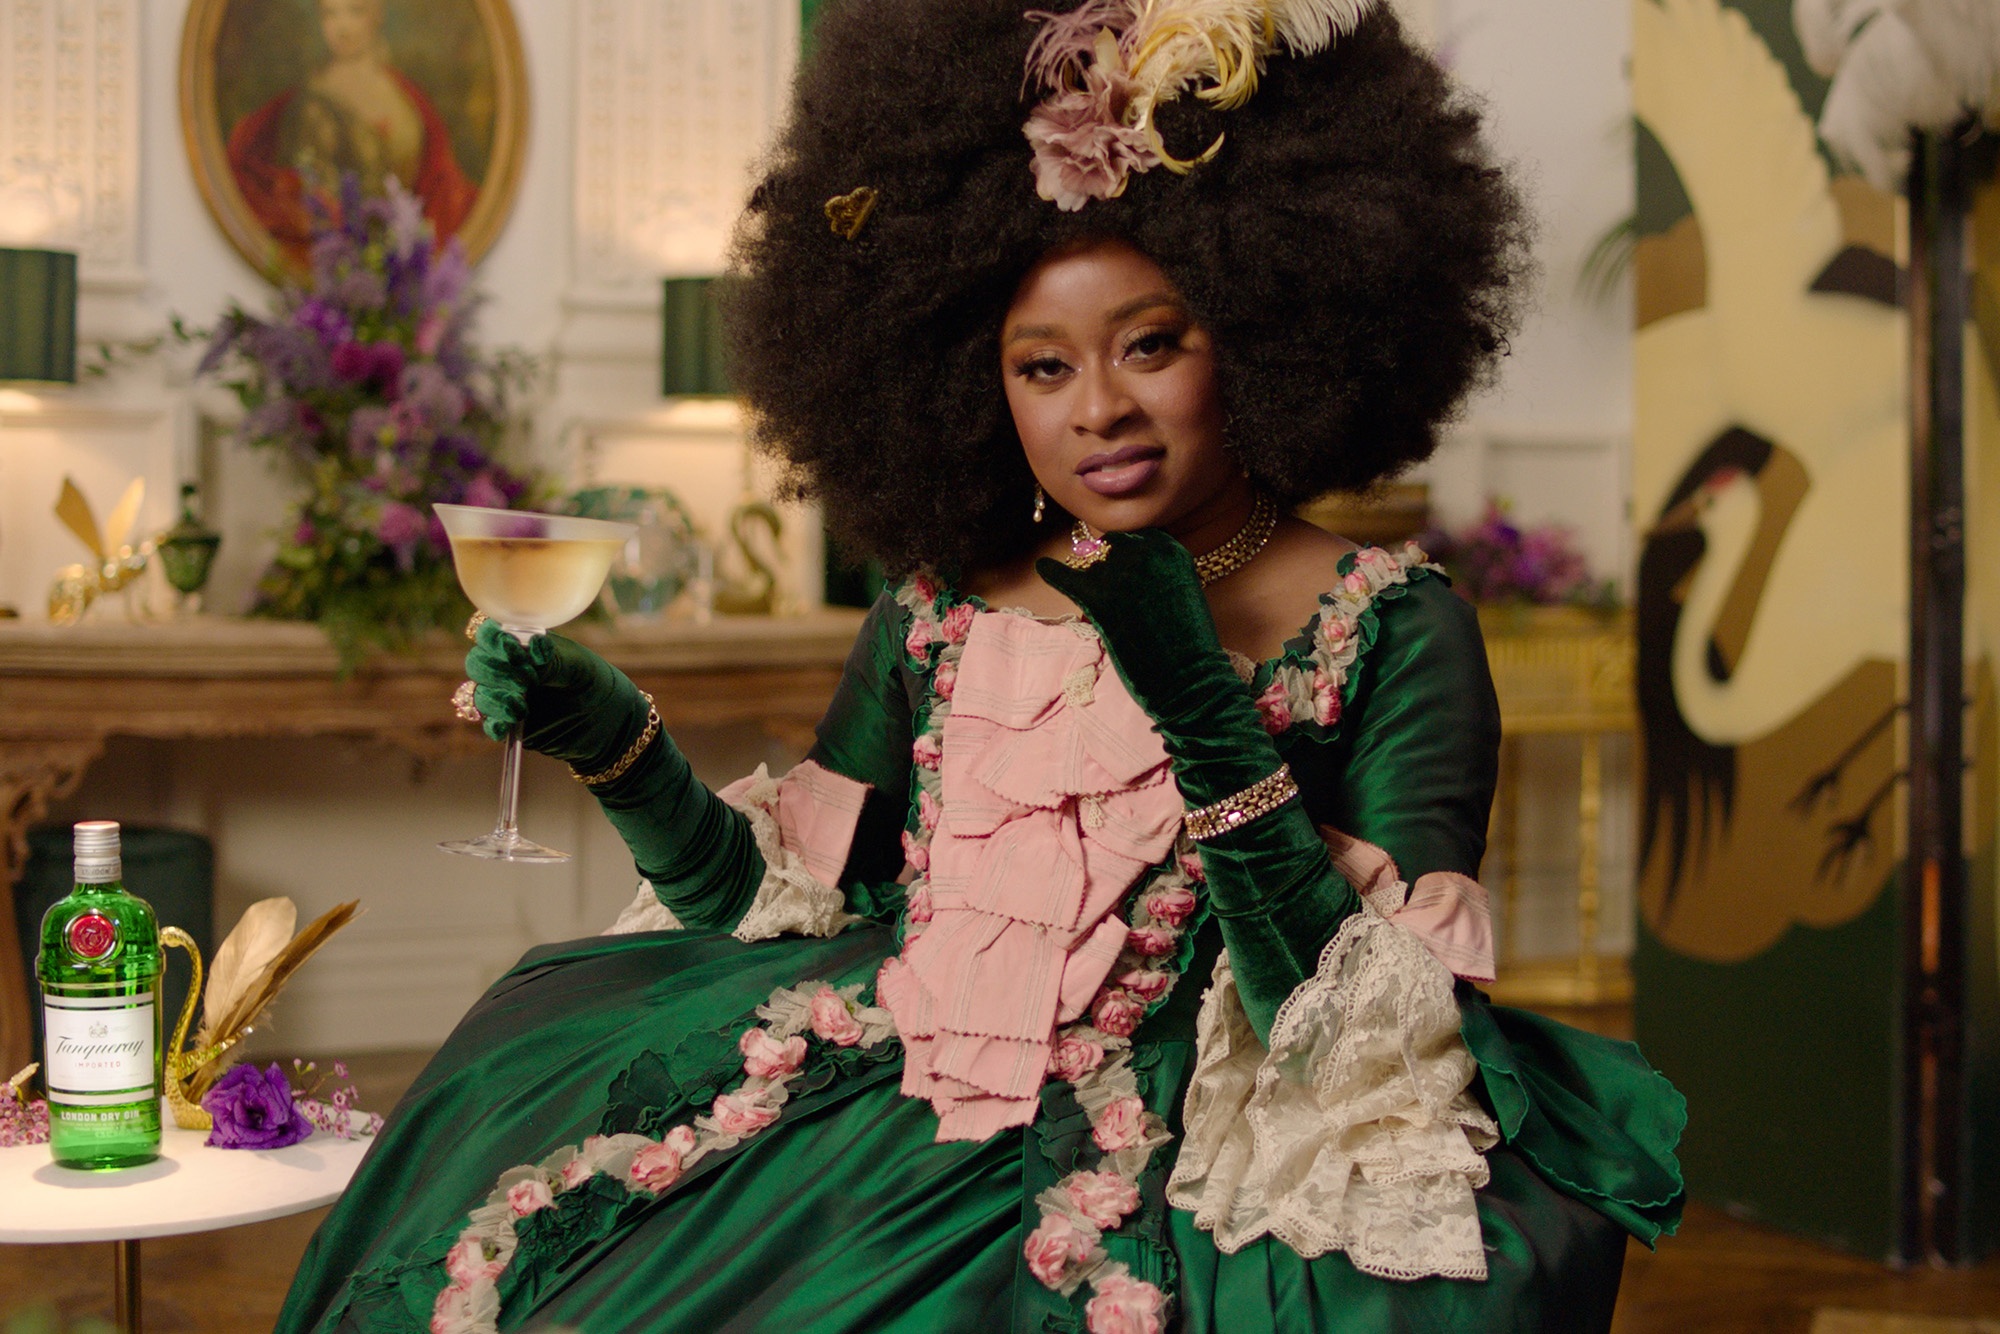 Tanqueray teamed up with Phoebe Robinson to launch new “Make it T-Time” campaign in partnership with Netflix’s “Bridgerton"